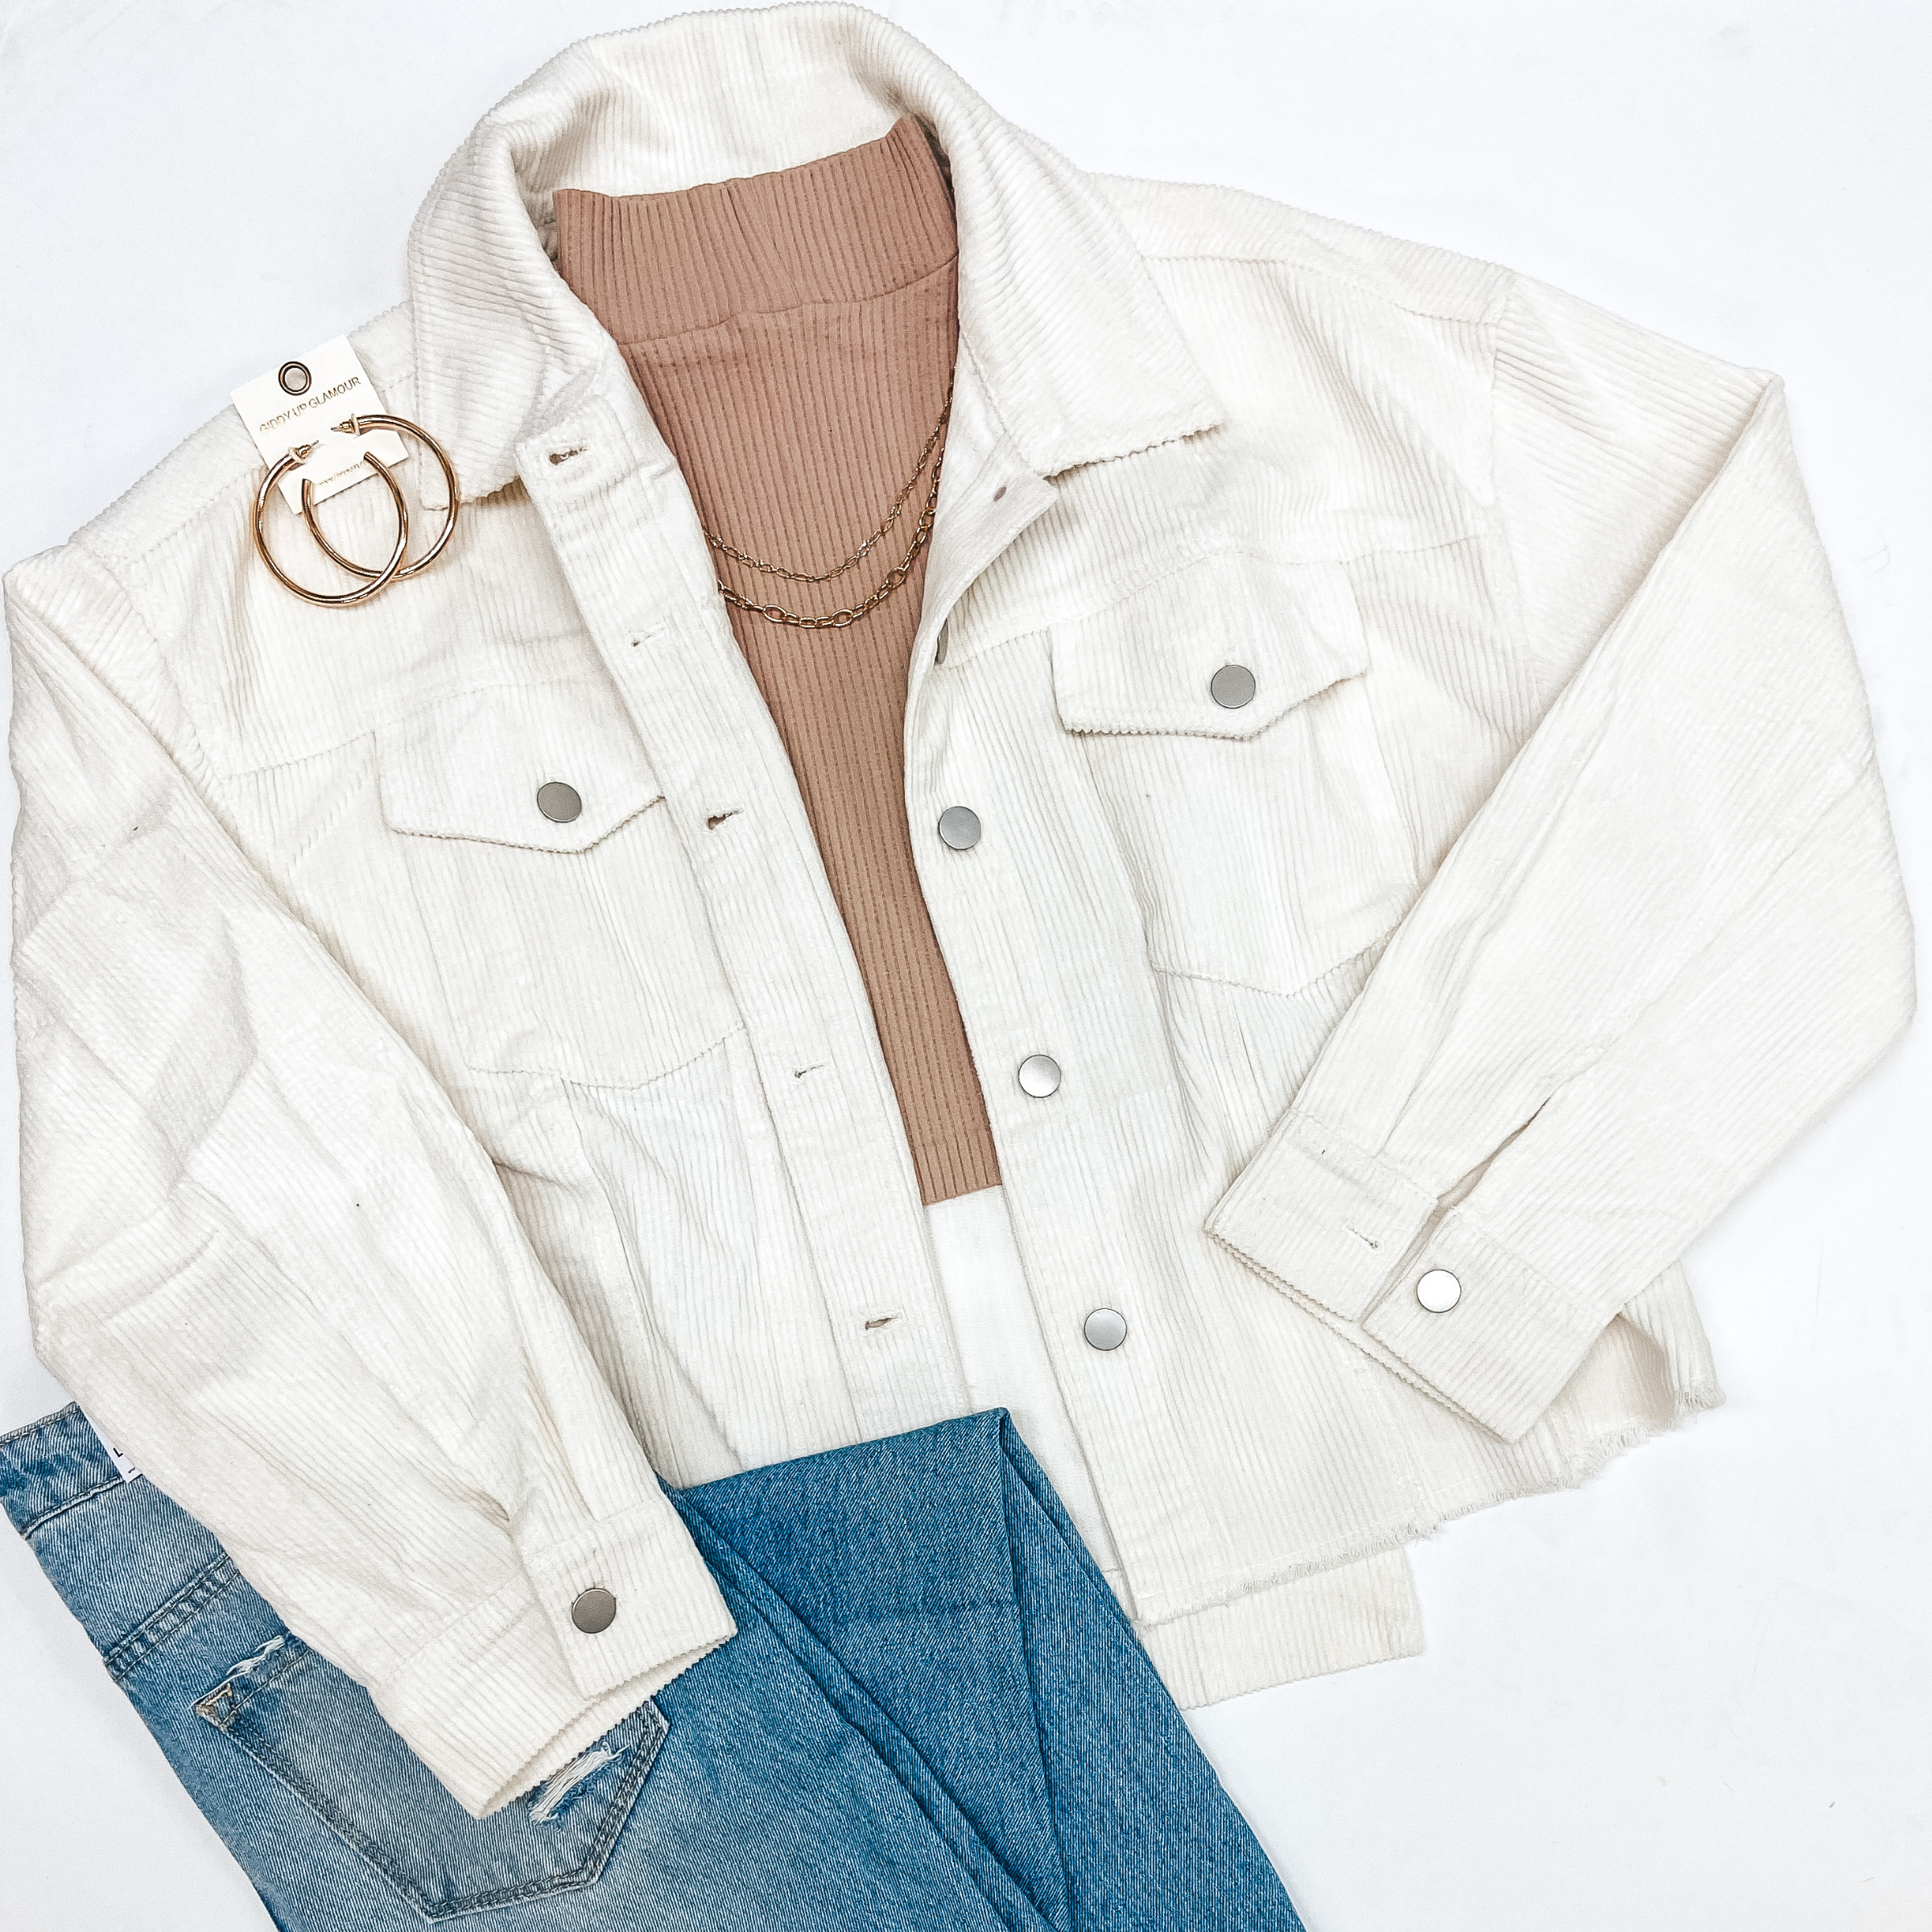 An ivory corduroy shacket pictured with a taupe turtle neck, blue jean, and gold jewelry.